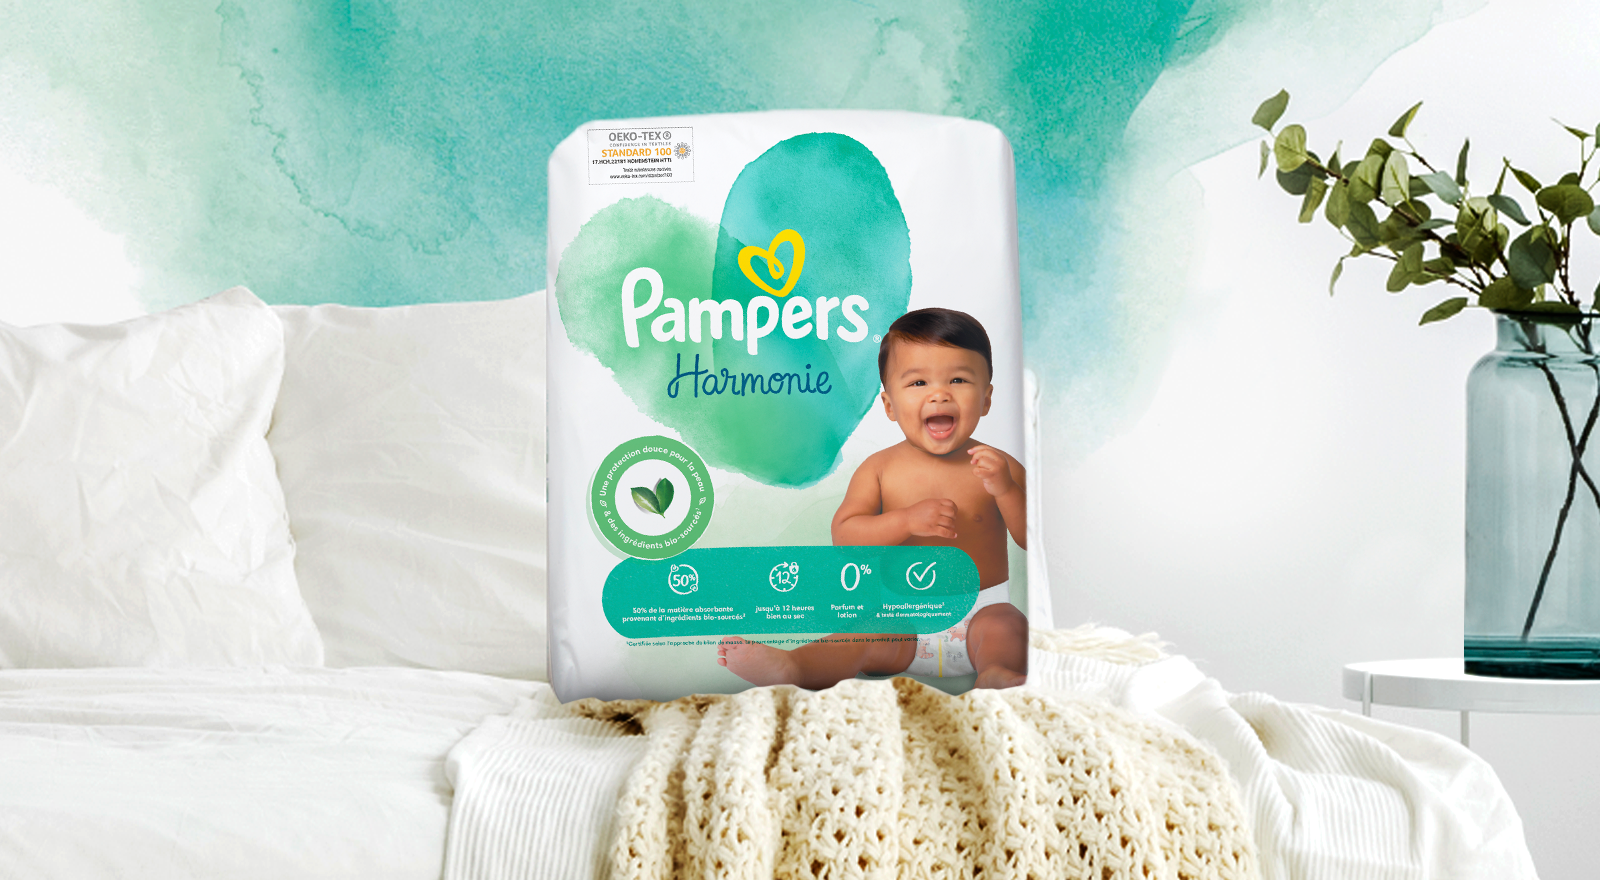 Couches Harmonie Couches Taille 2, 4kg - 8kg, PAMPERS x104 - Super